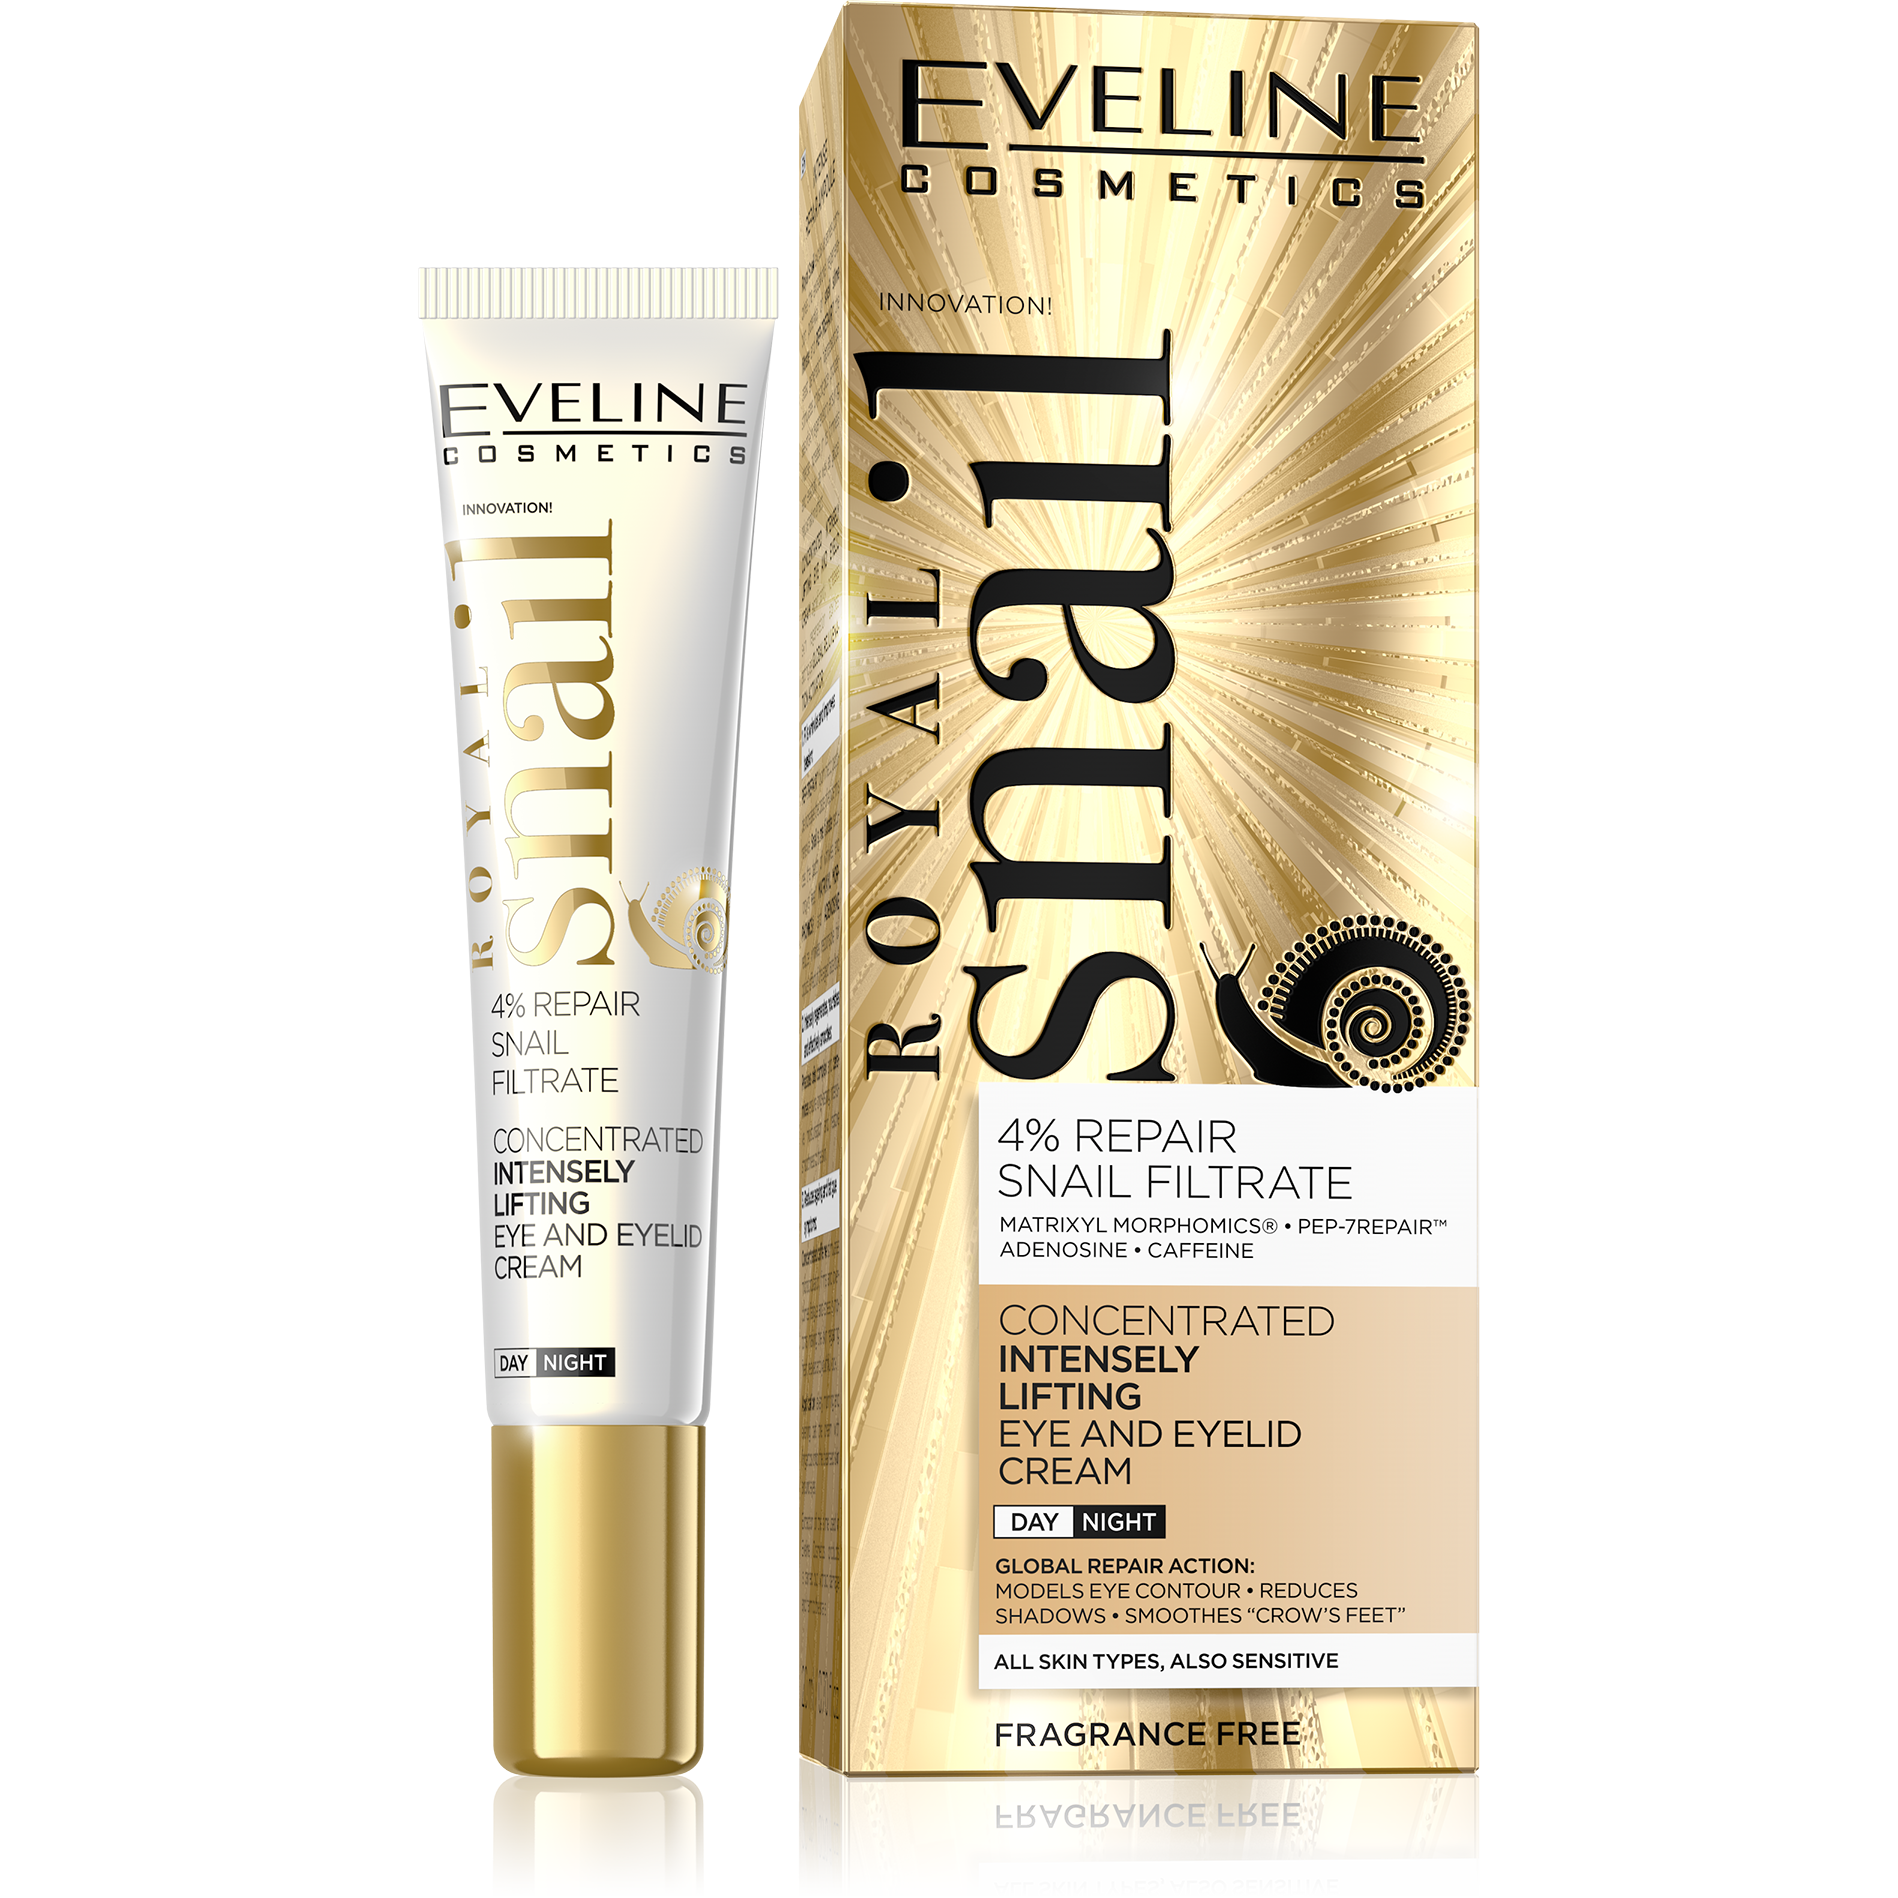 Royal Snail Concentrated Intensely Lifting Eye and Eyelid Cream eveline-cosmetics.myshopify.com